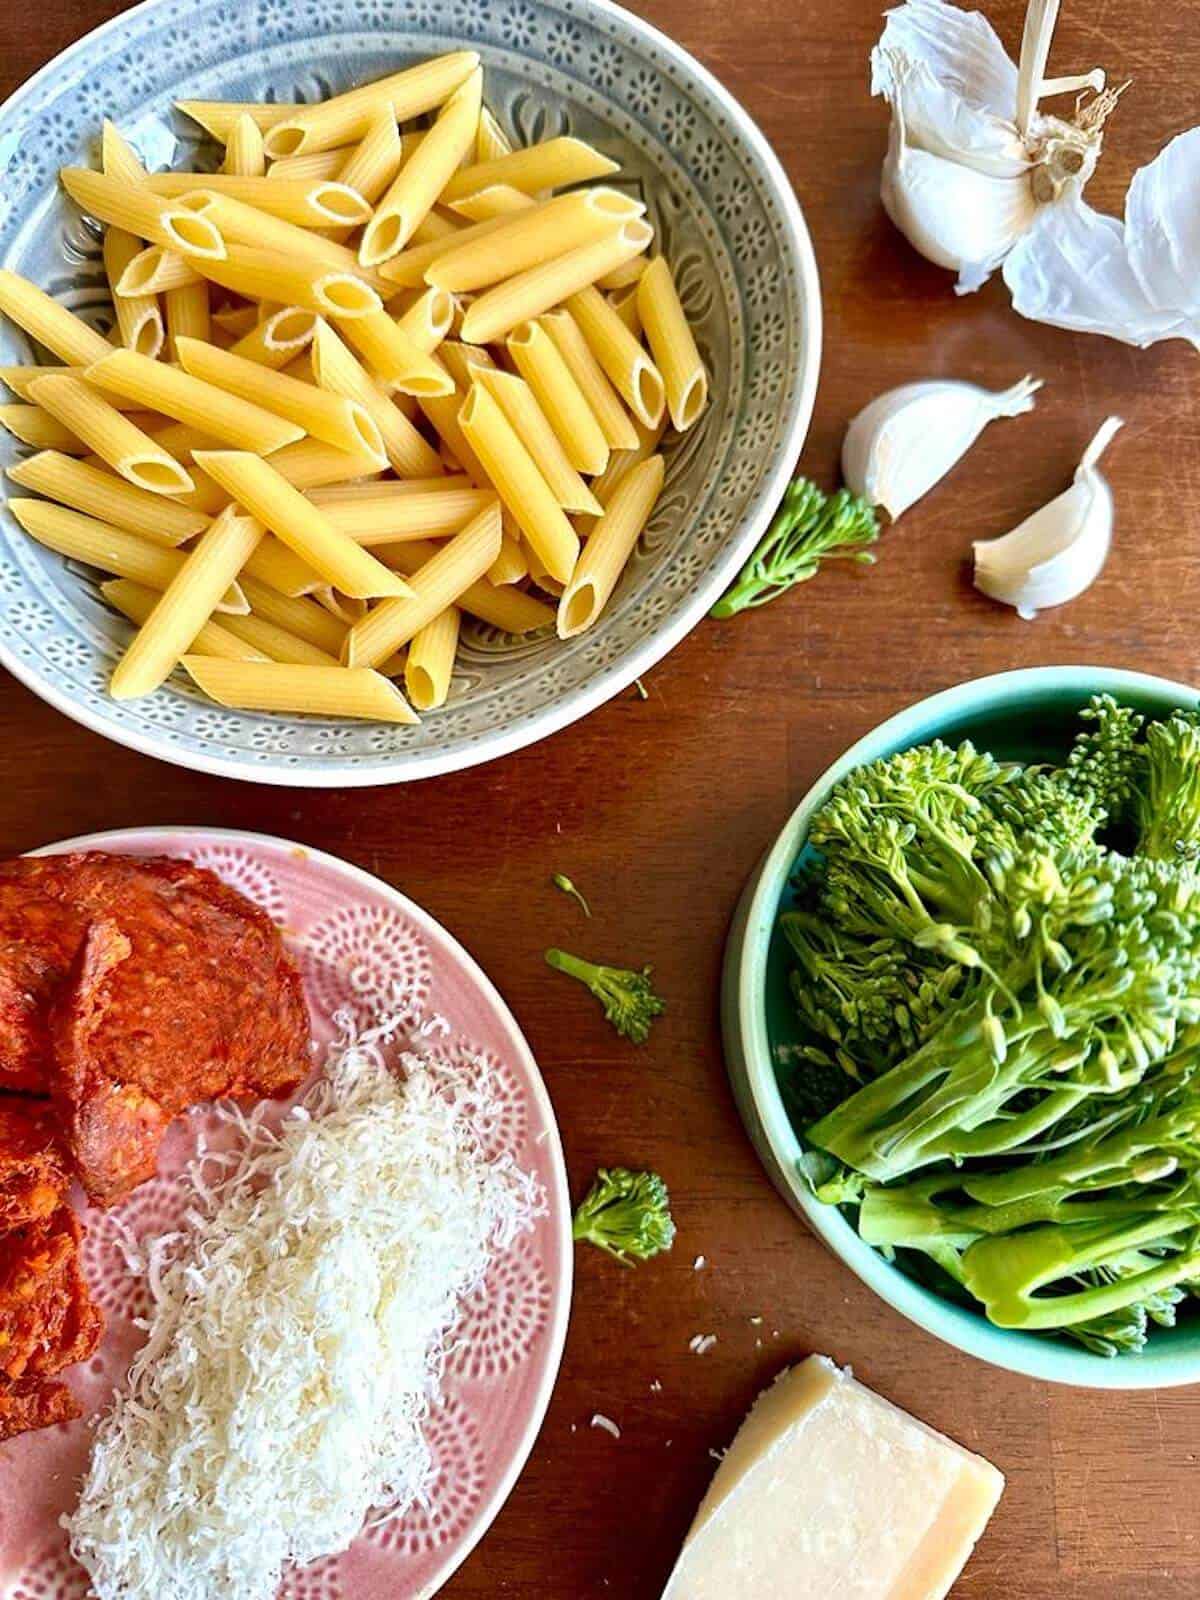 Spicy-Sausage-Broccolini-Pasta-ingredients-in-bowls-on-a-table.